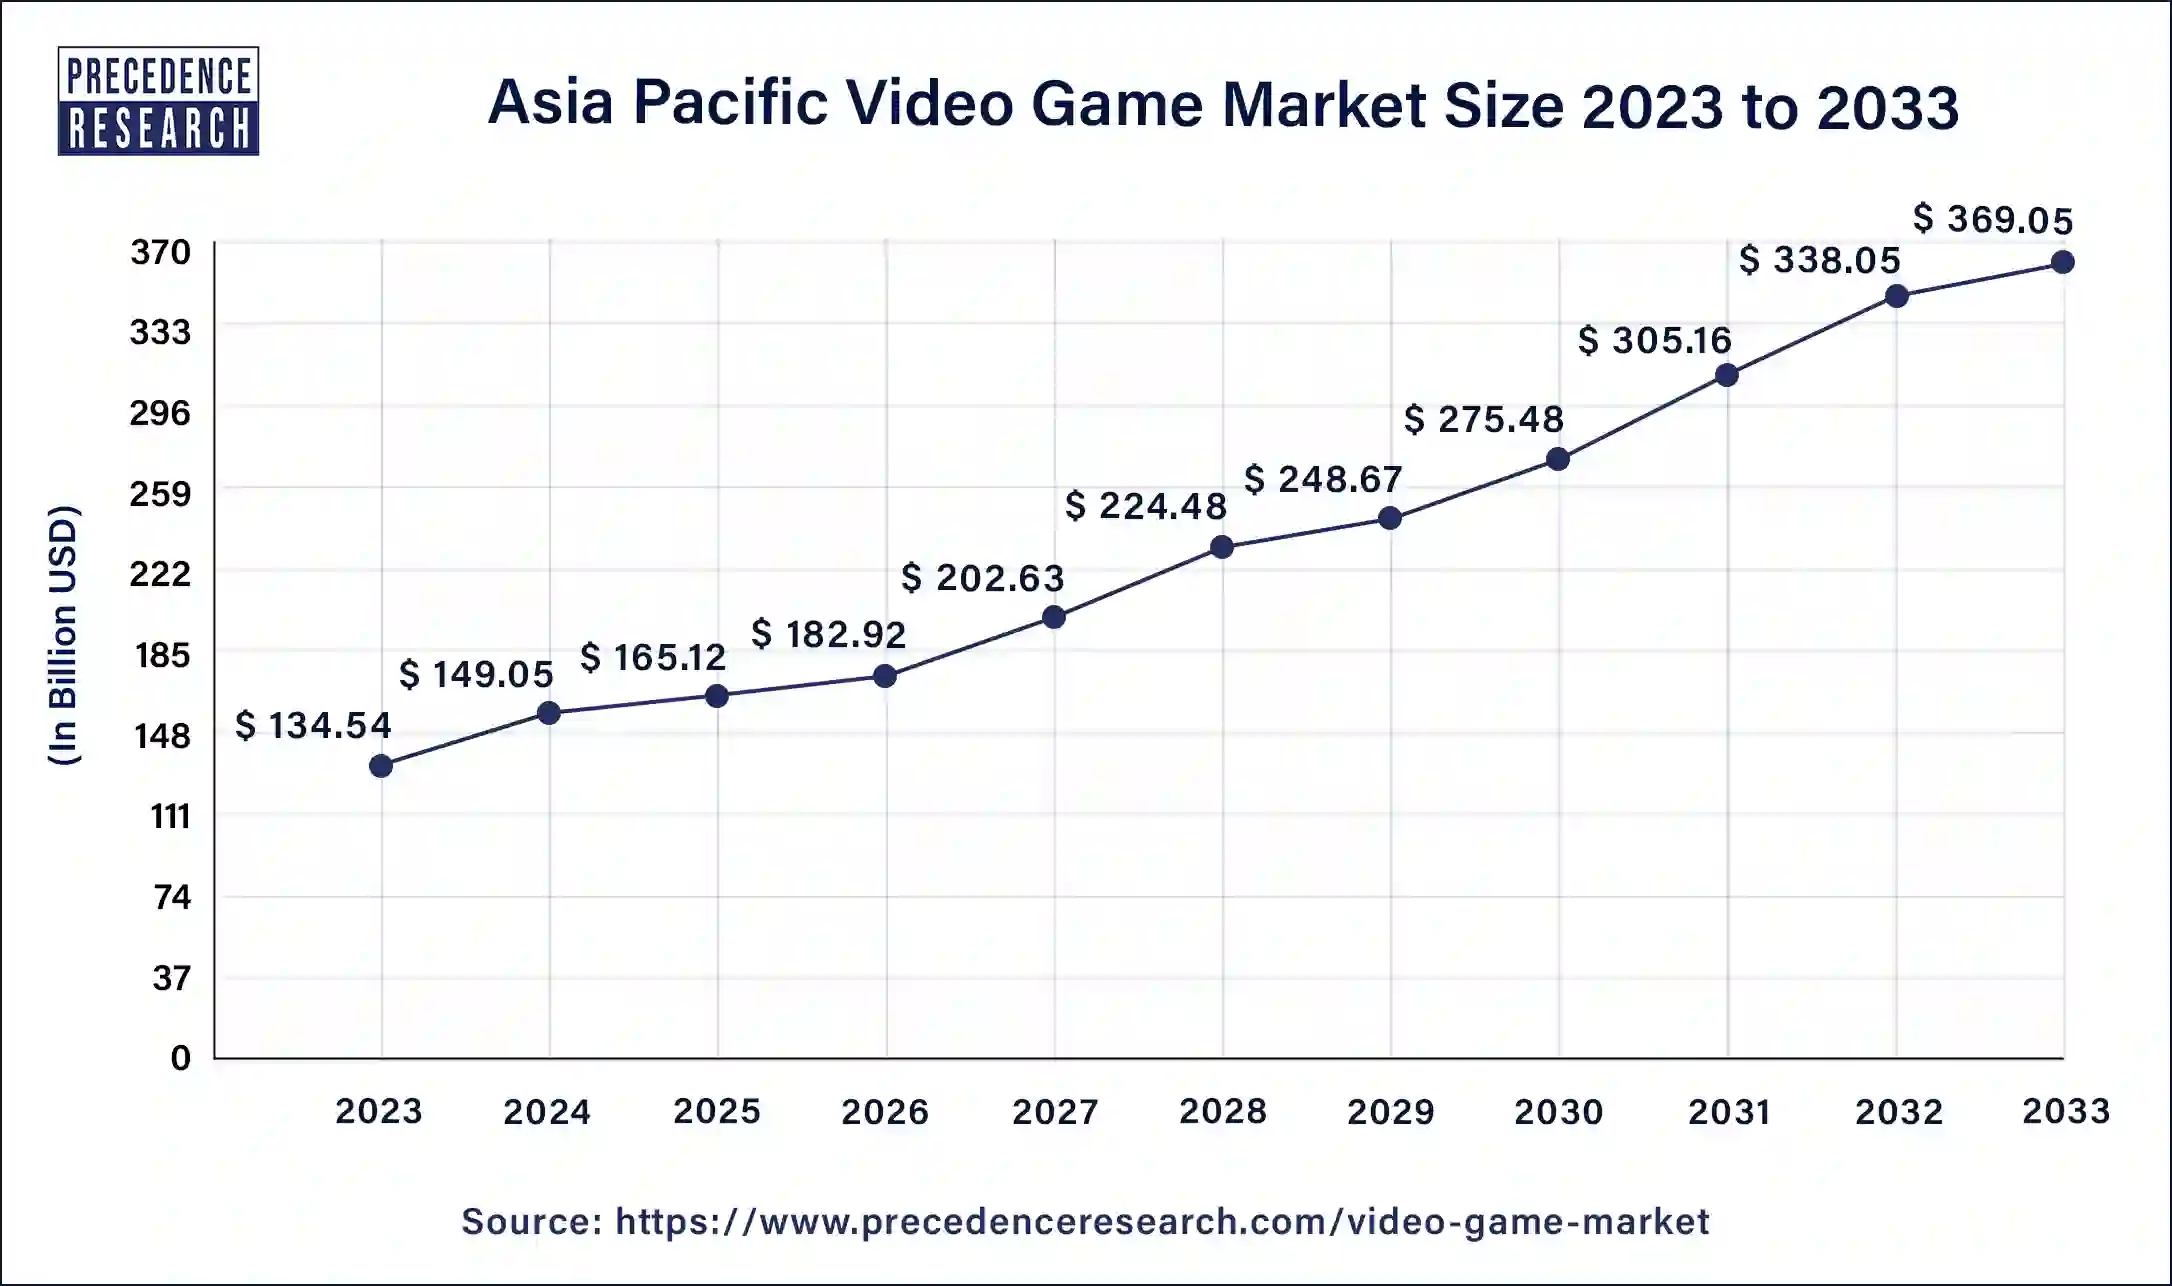 Asia Pacific Video Game Market Size 2024 to 2033